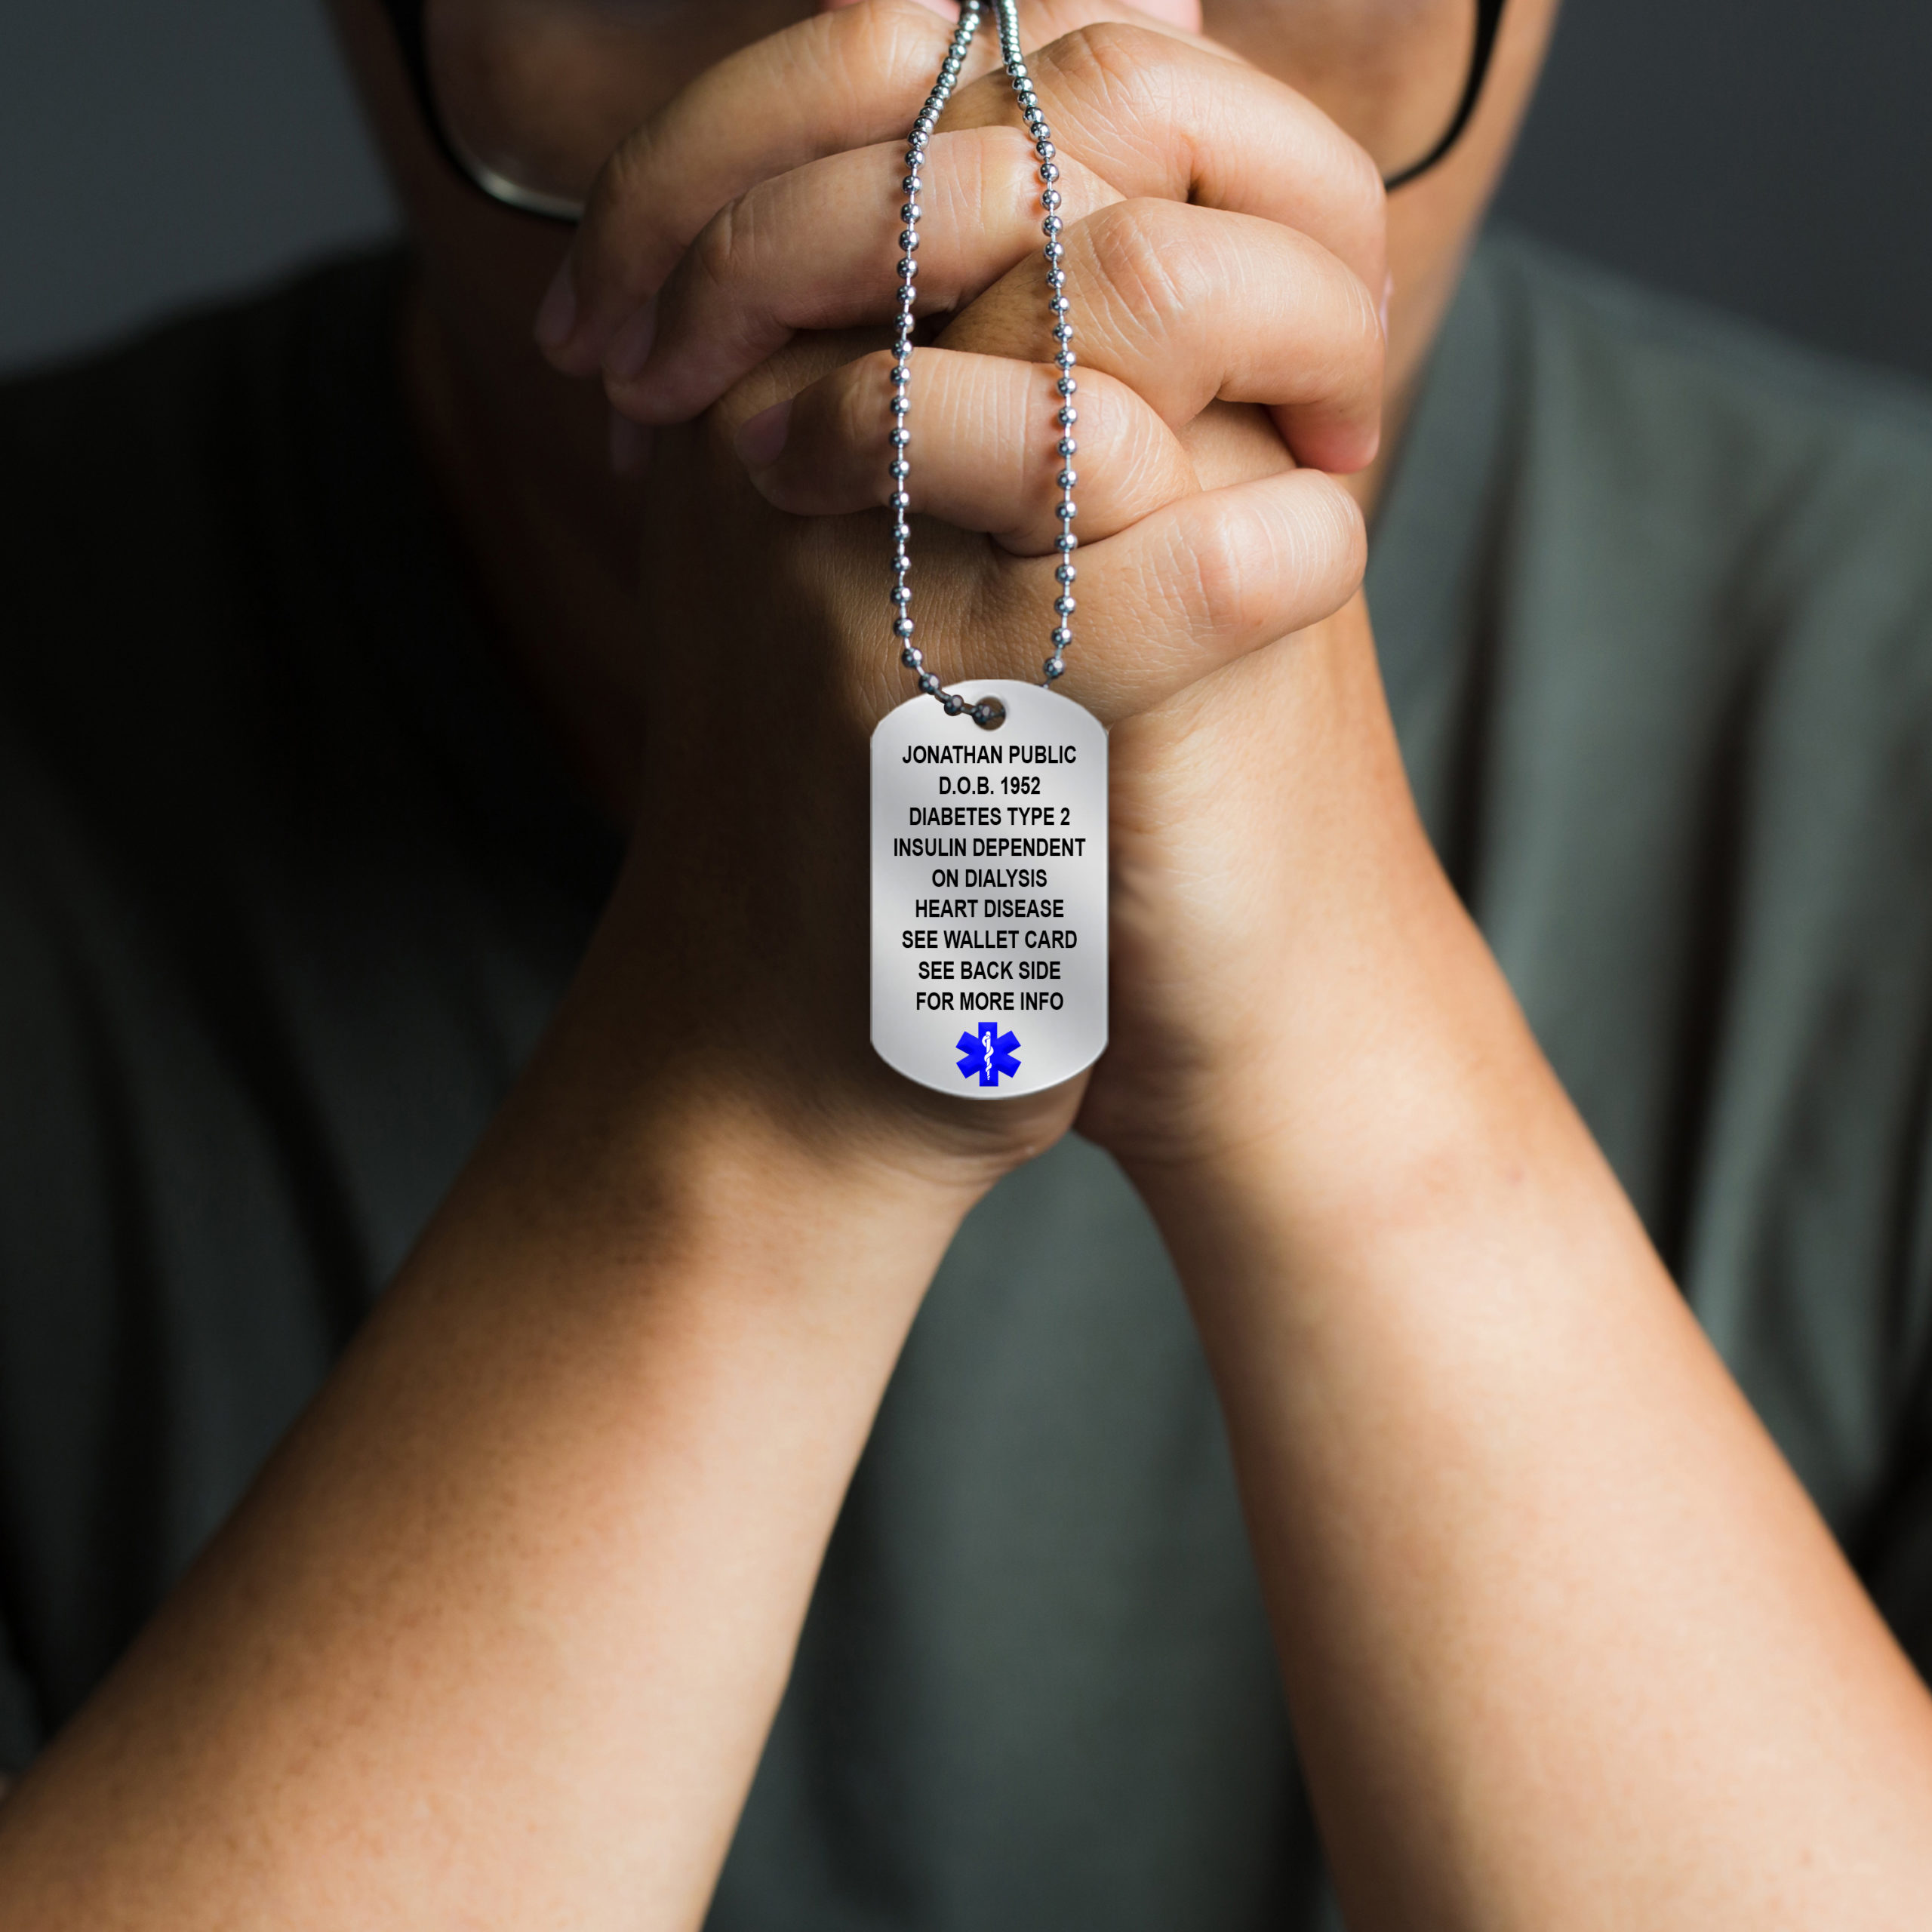 What Cancer Cannot Do Dog Tag Key Ring